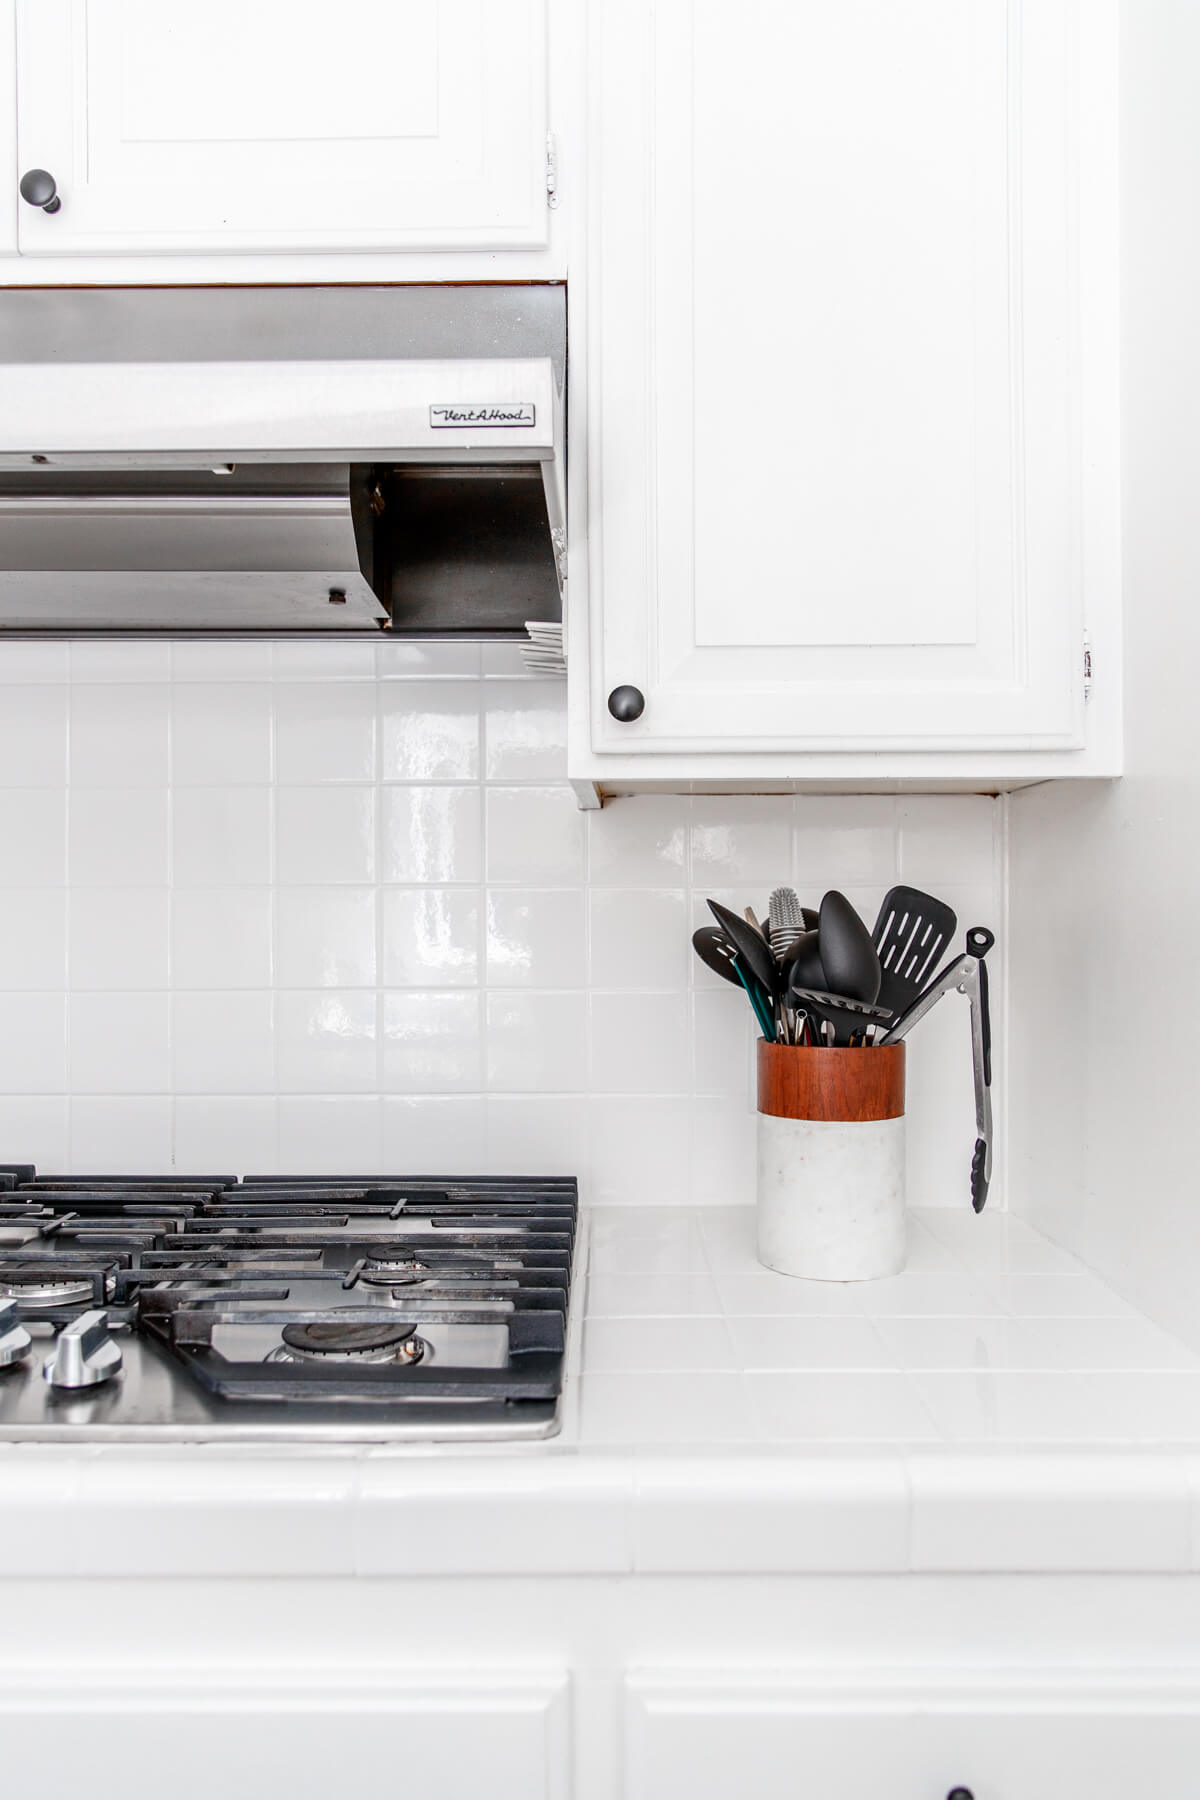 stovetop, hood, and utensils on white tile countertop